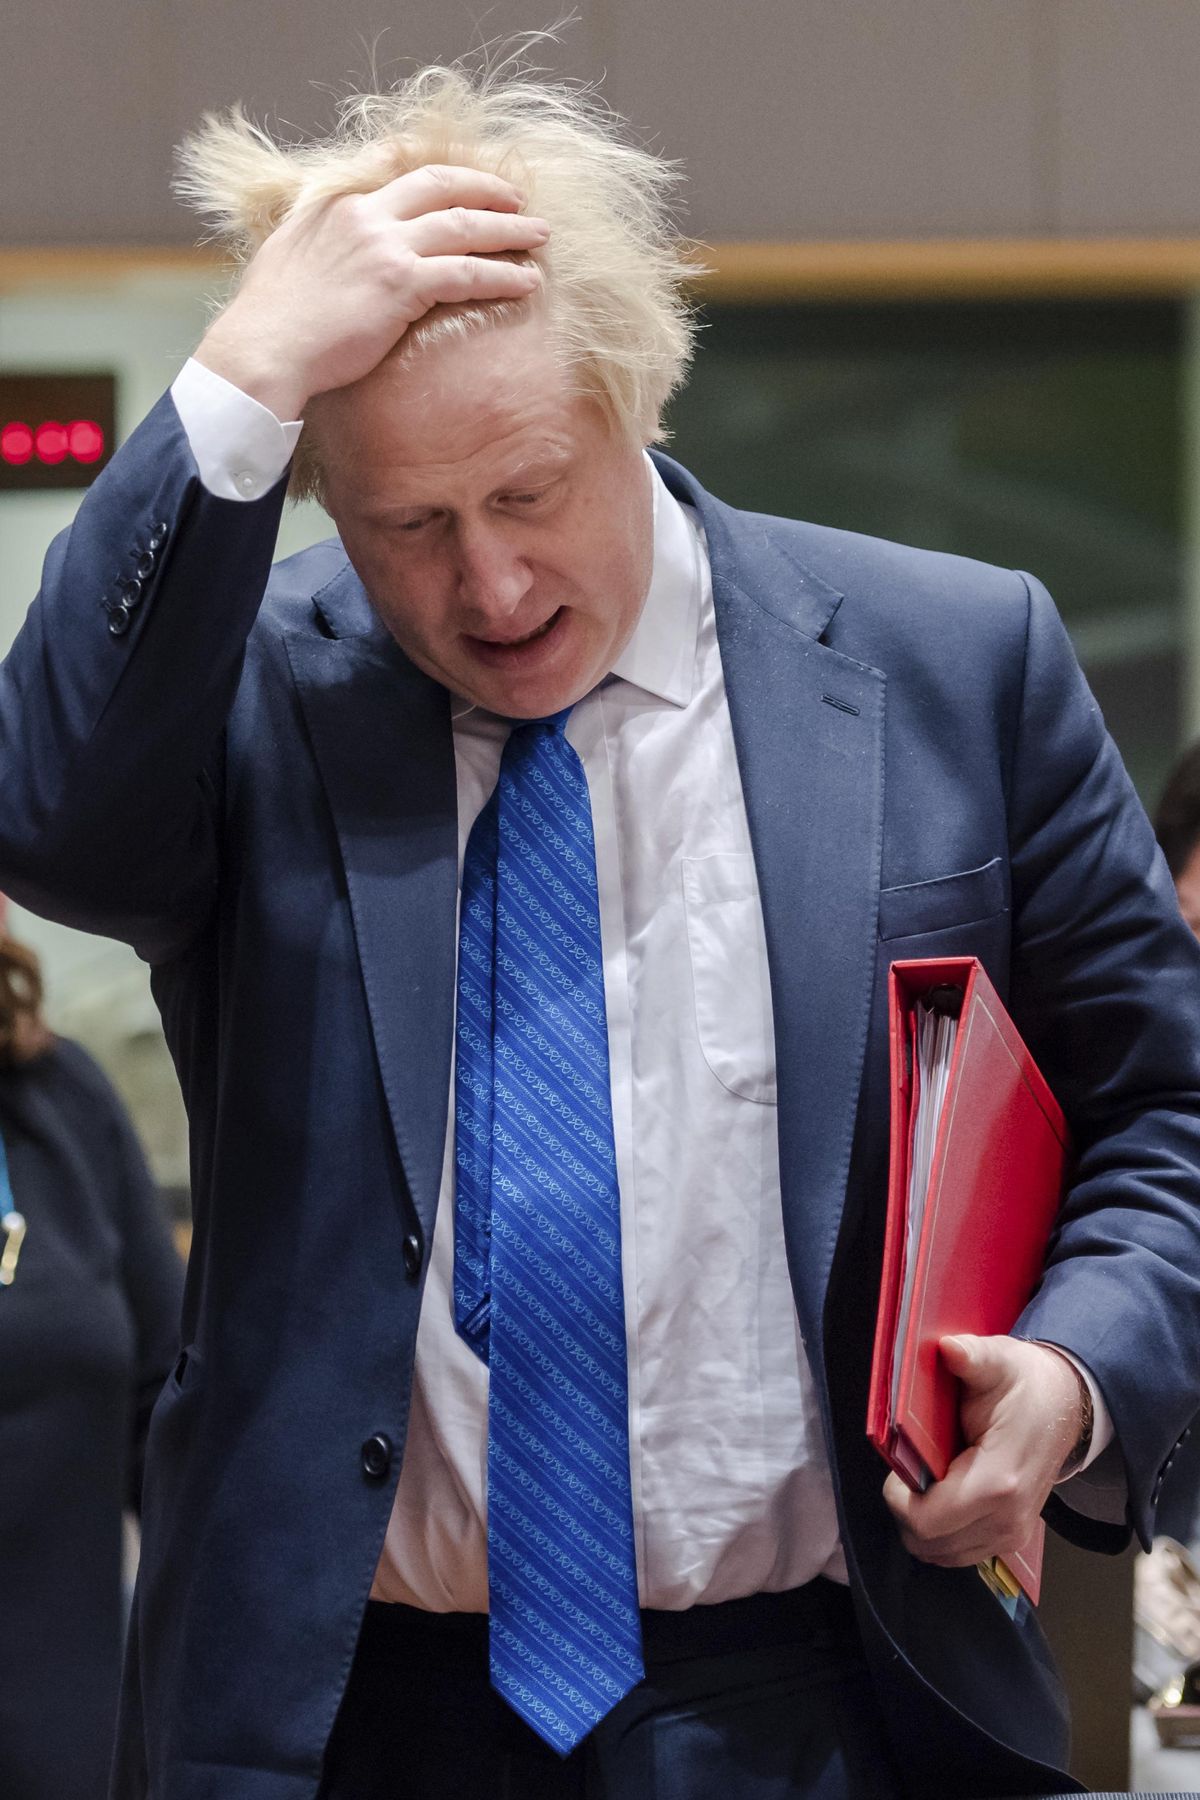 Britain’s Foreign Secretary Boris Johnson, arrives for a meeting of EU foreign ministers at the Europa building in Brussels, Monday, May 15, 2017. (Geert Vanden Wijngaert / Associated Press)